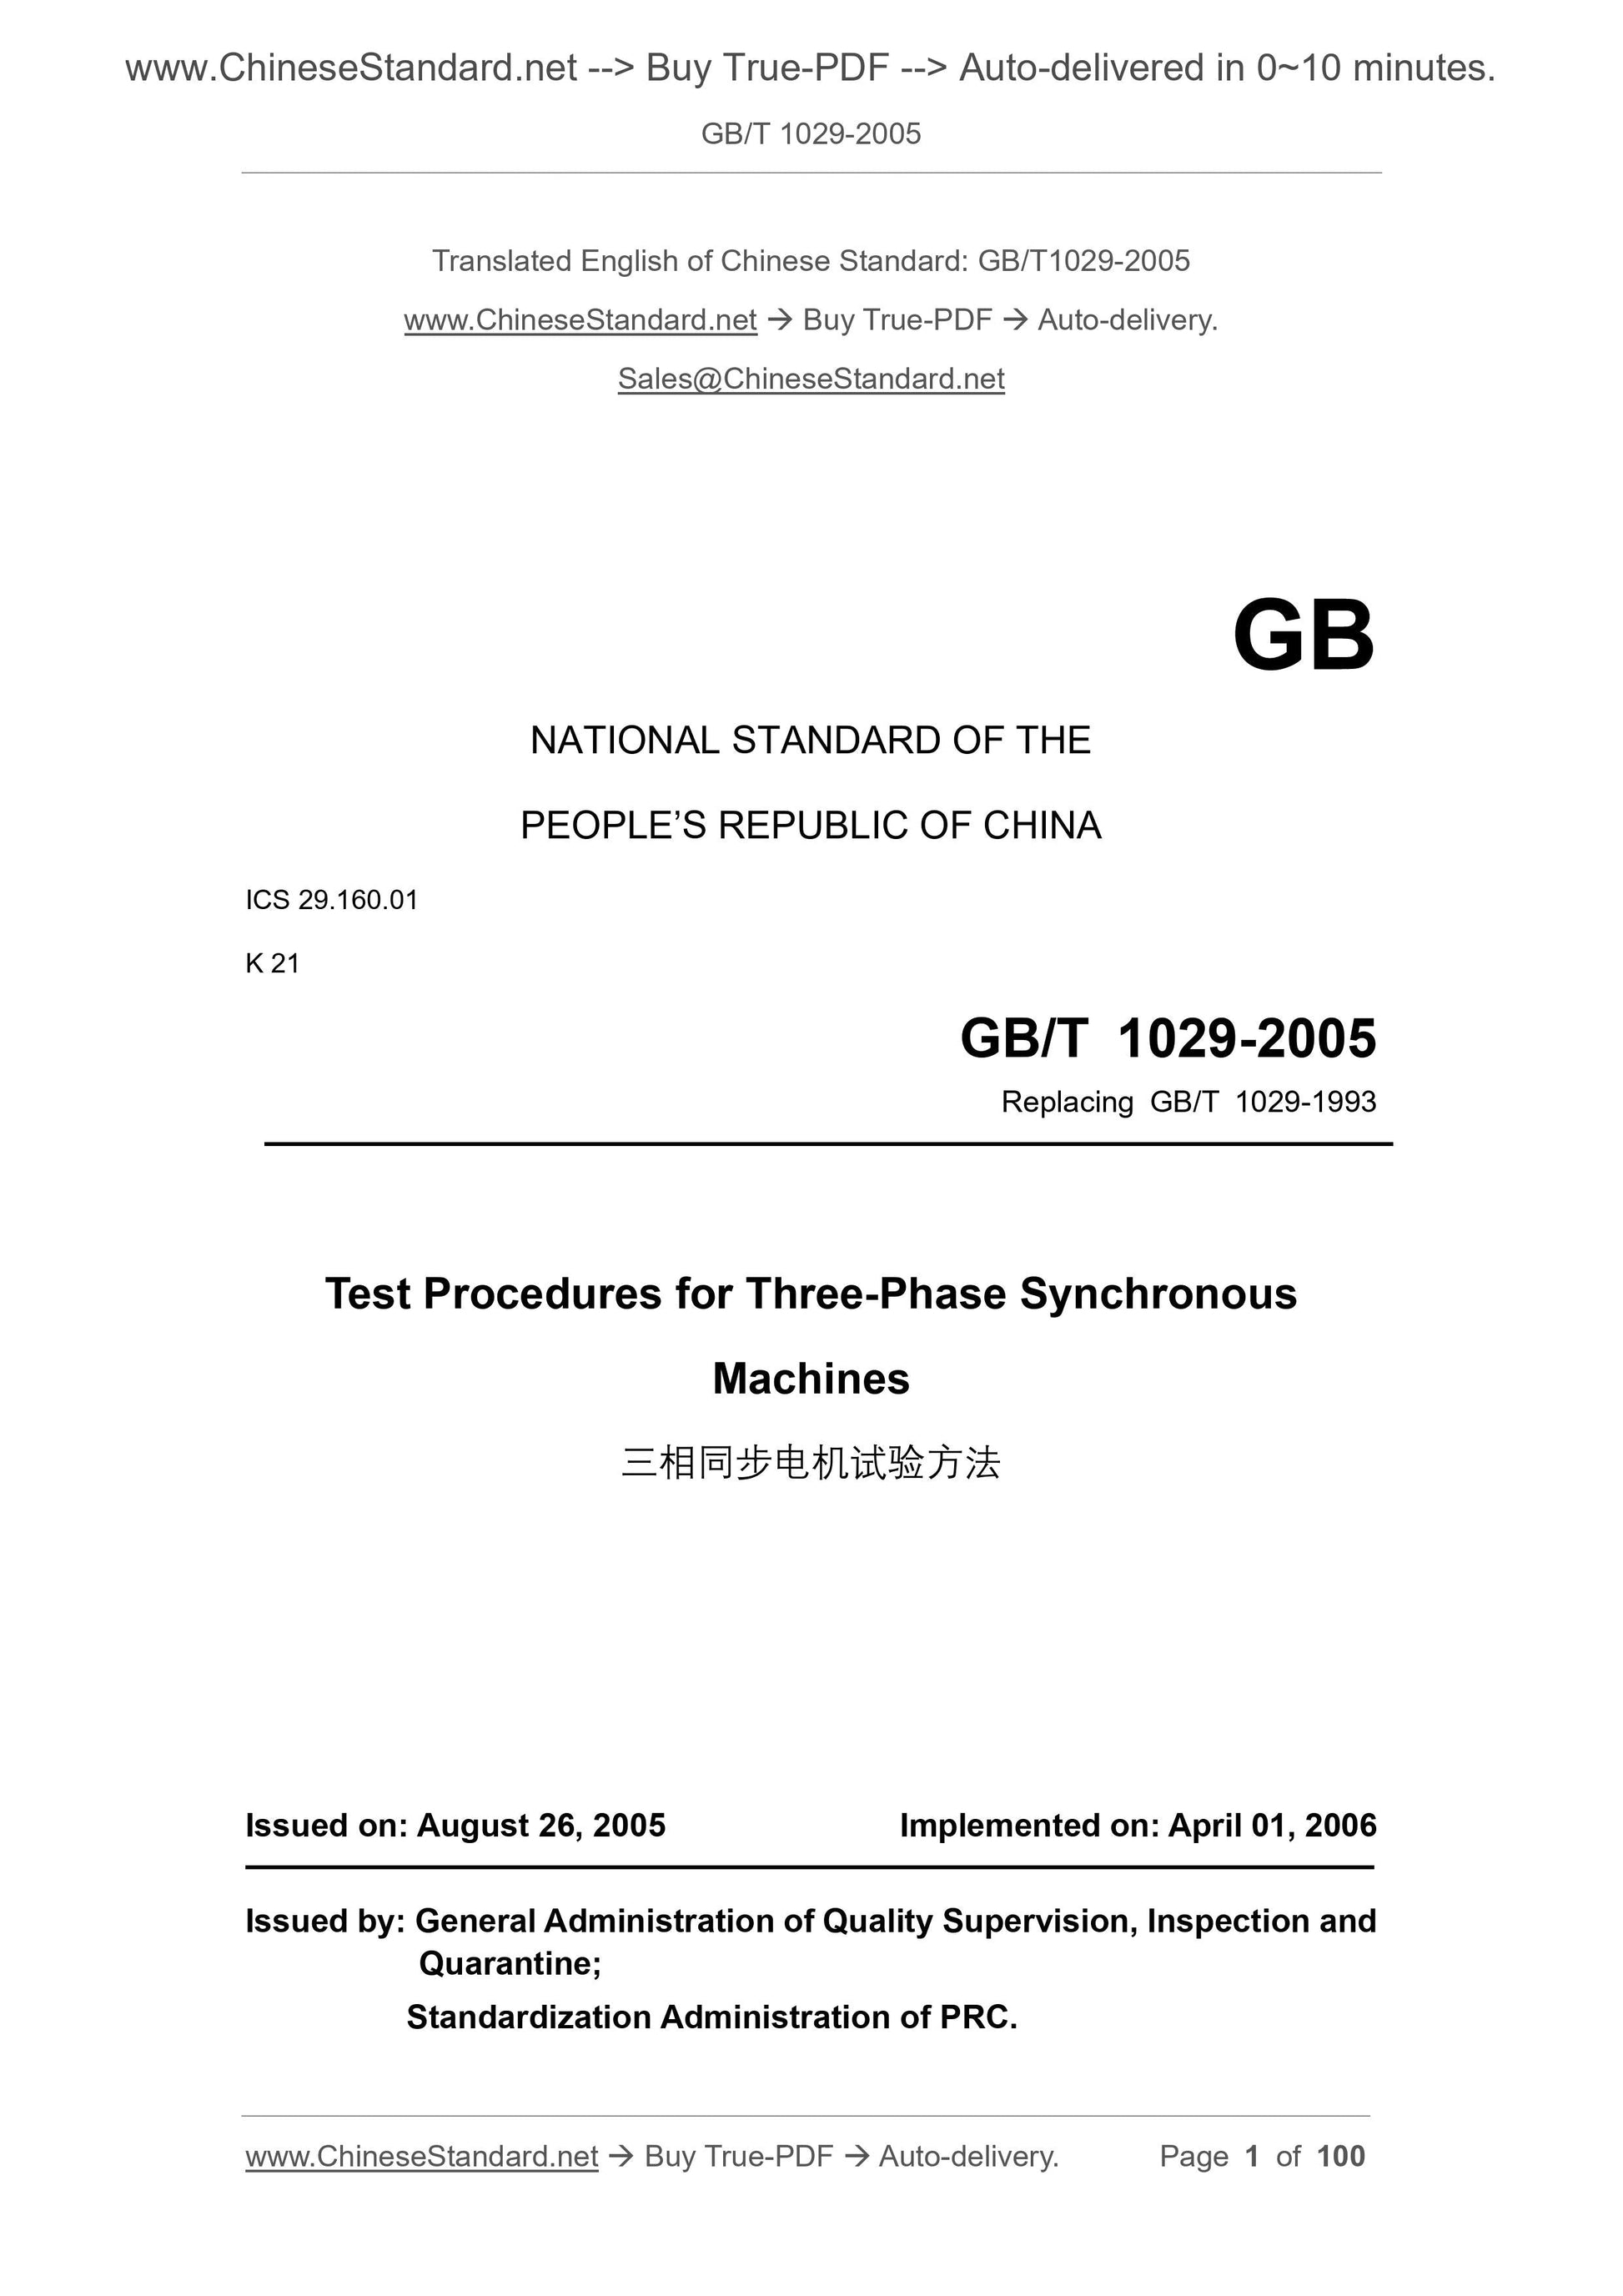 GB/T 1029-2005 Page 1